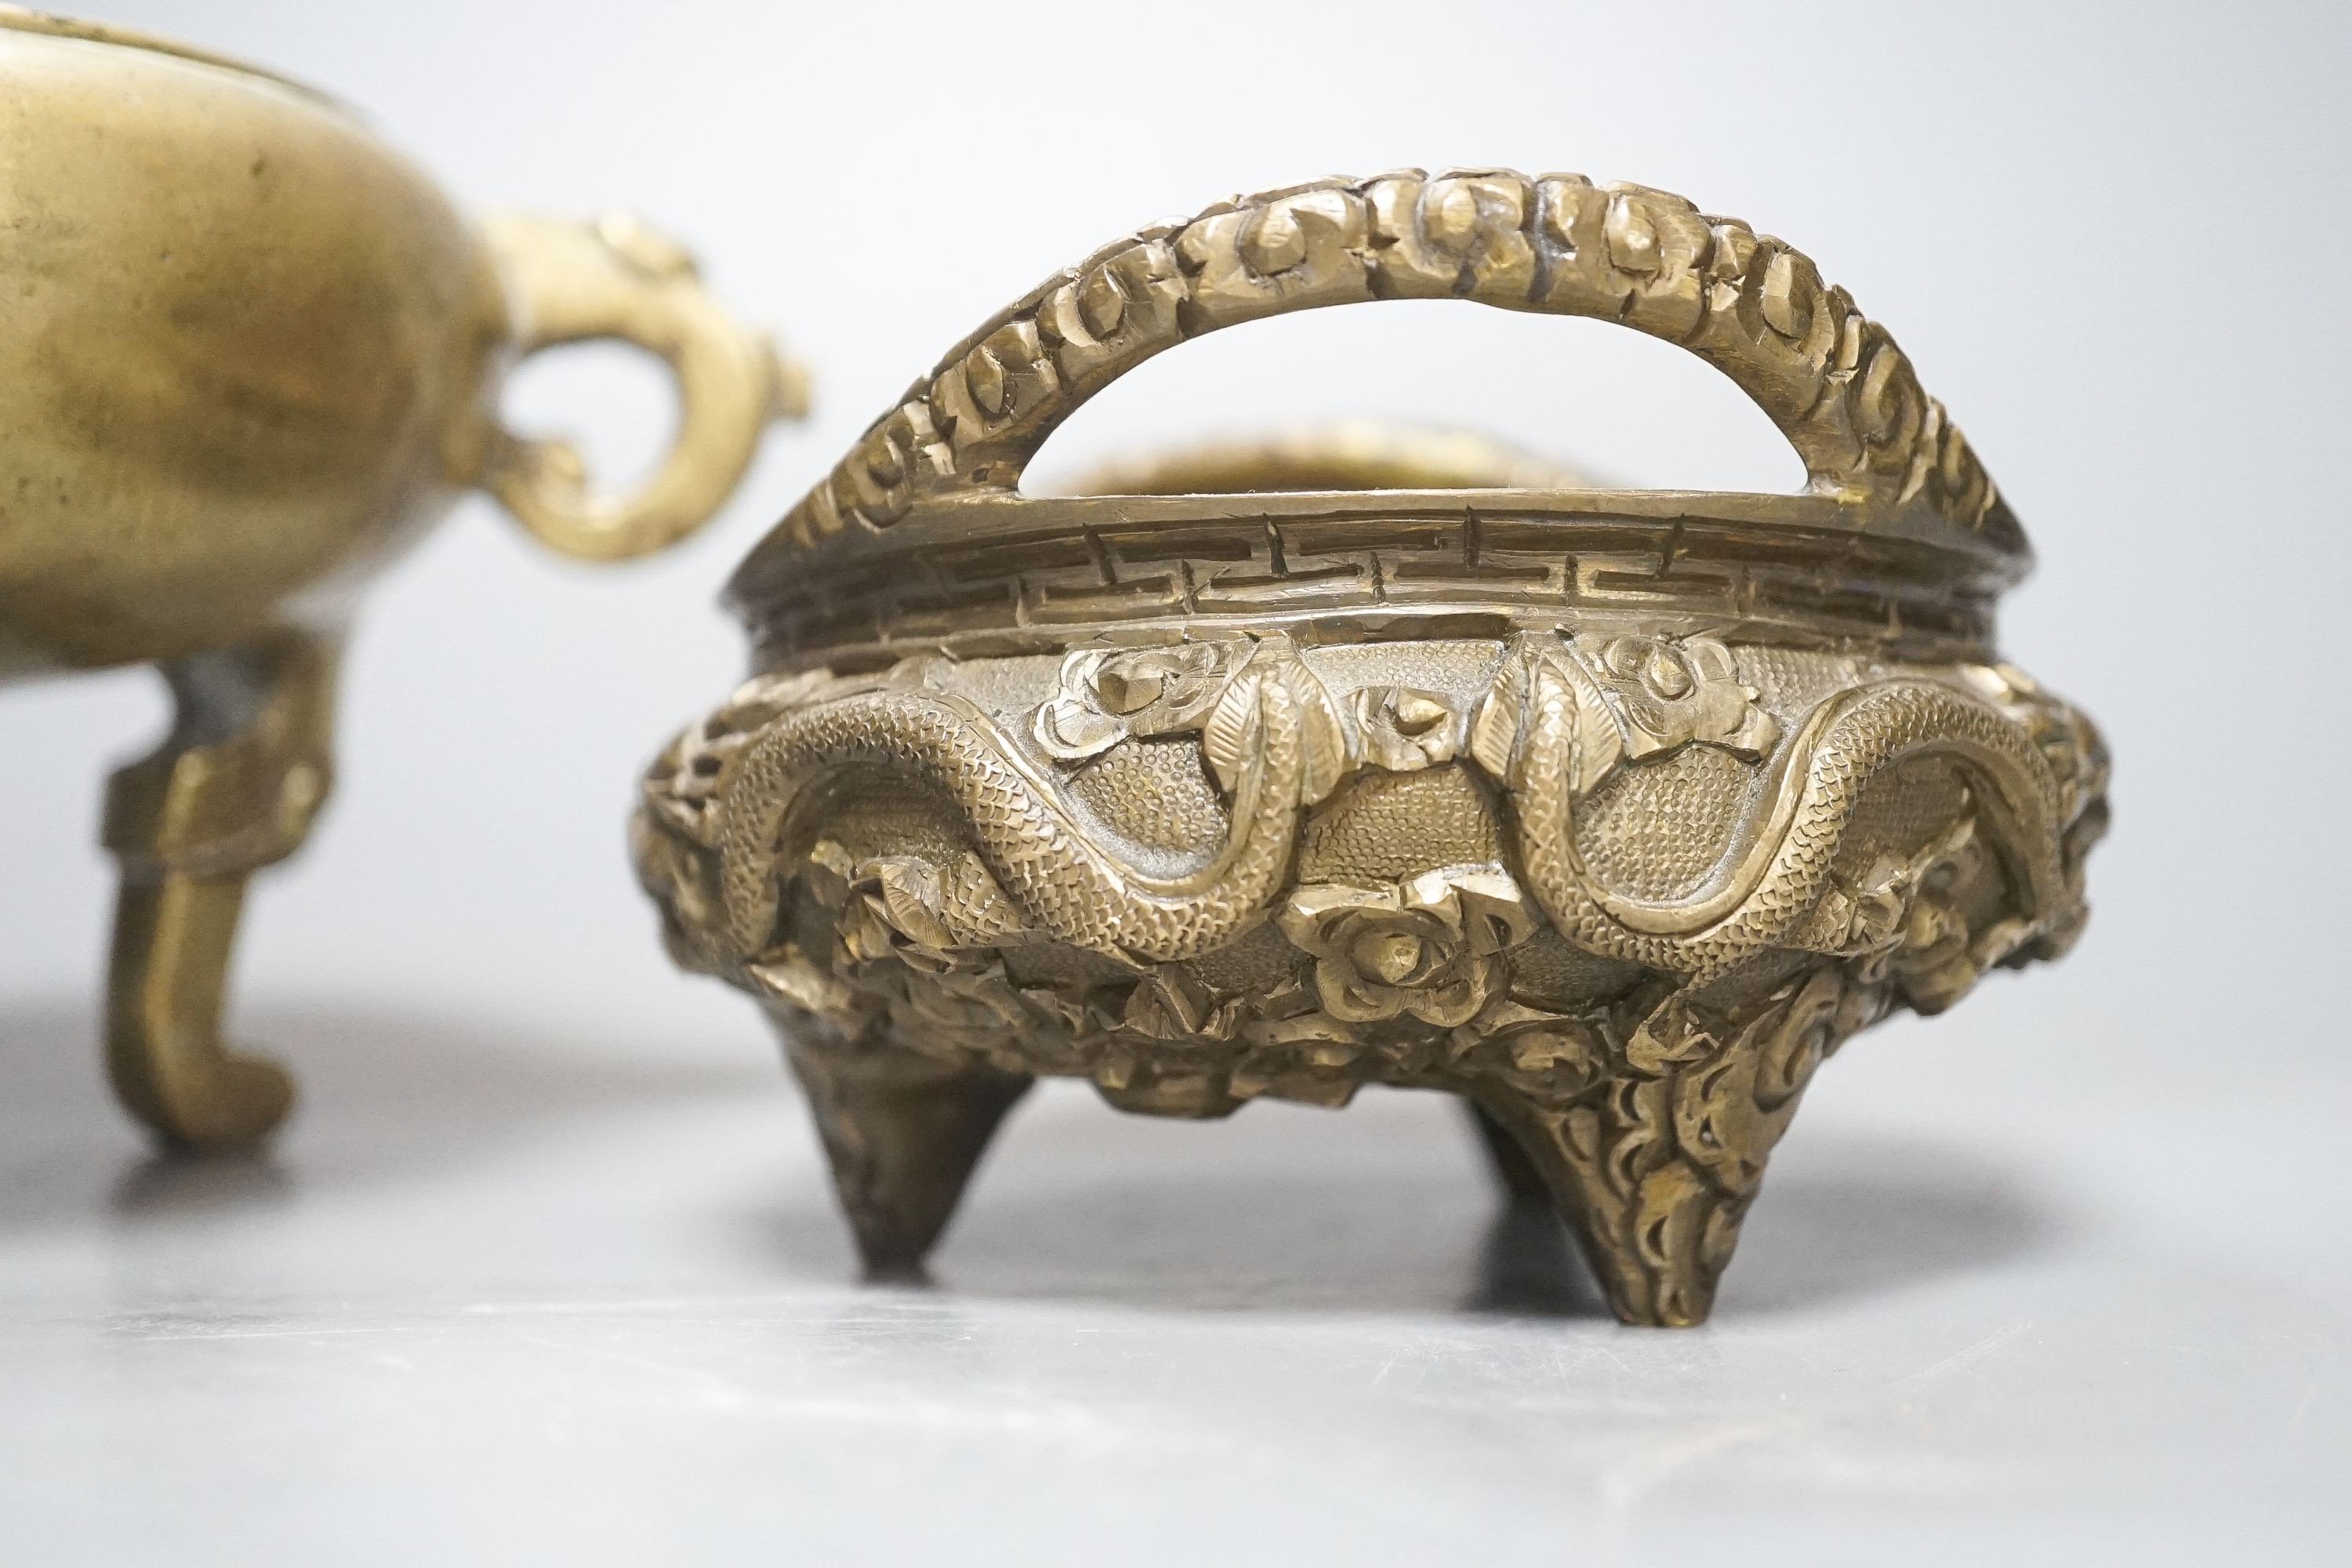 Two Chinese bronze tripod censers, Xuande marks but early 20th century, largest 21cm wide